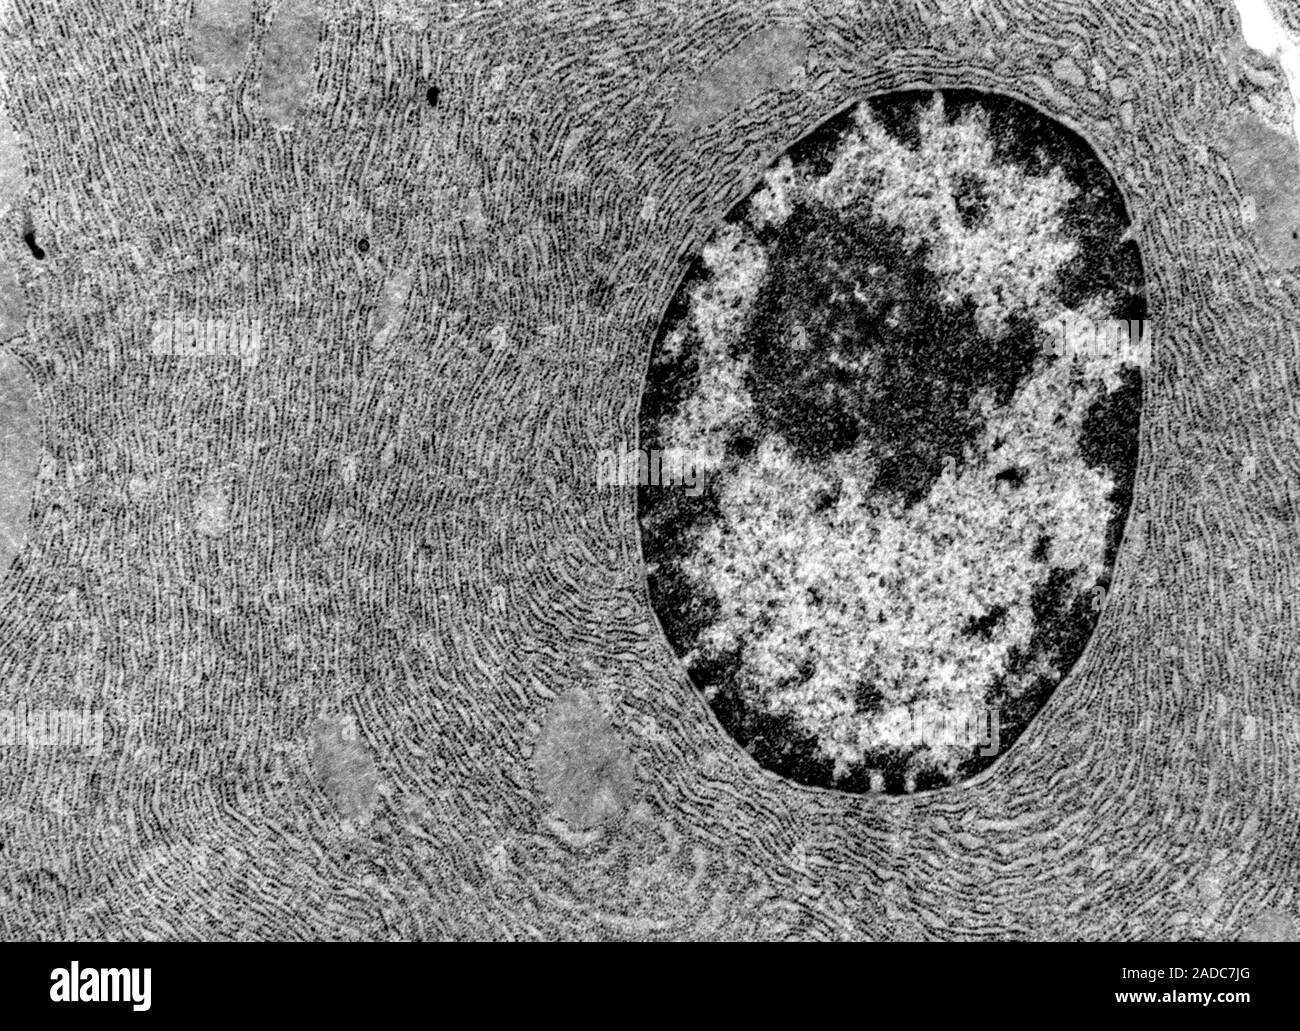 Transmission electron micrograph (TEM) showing the nucleus (with a ...